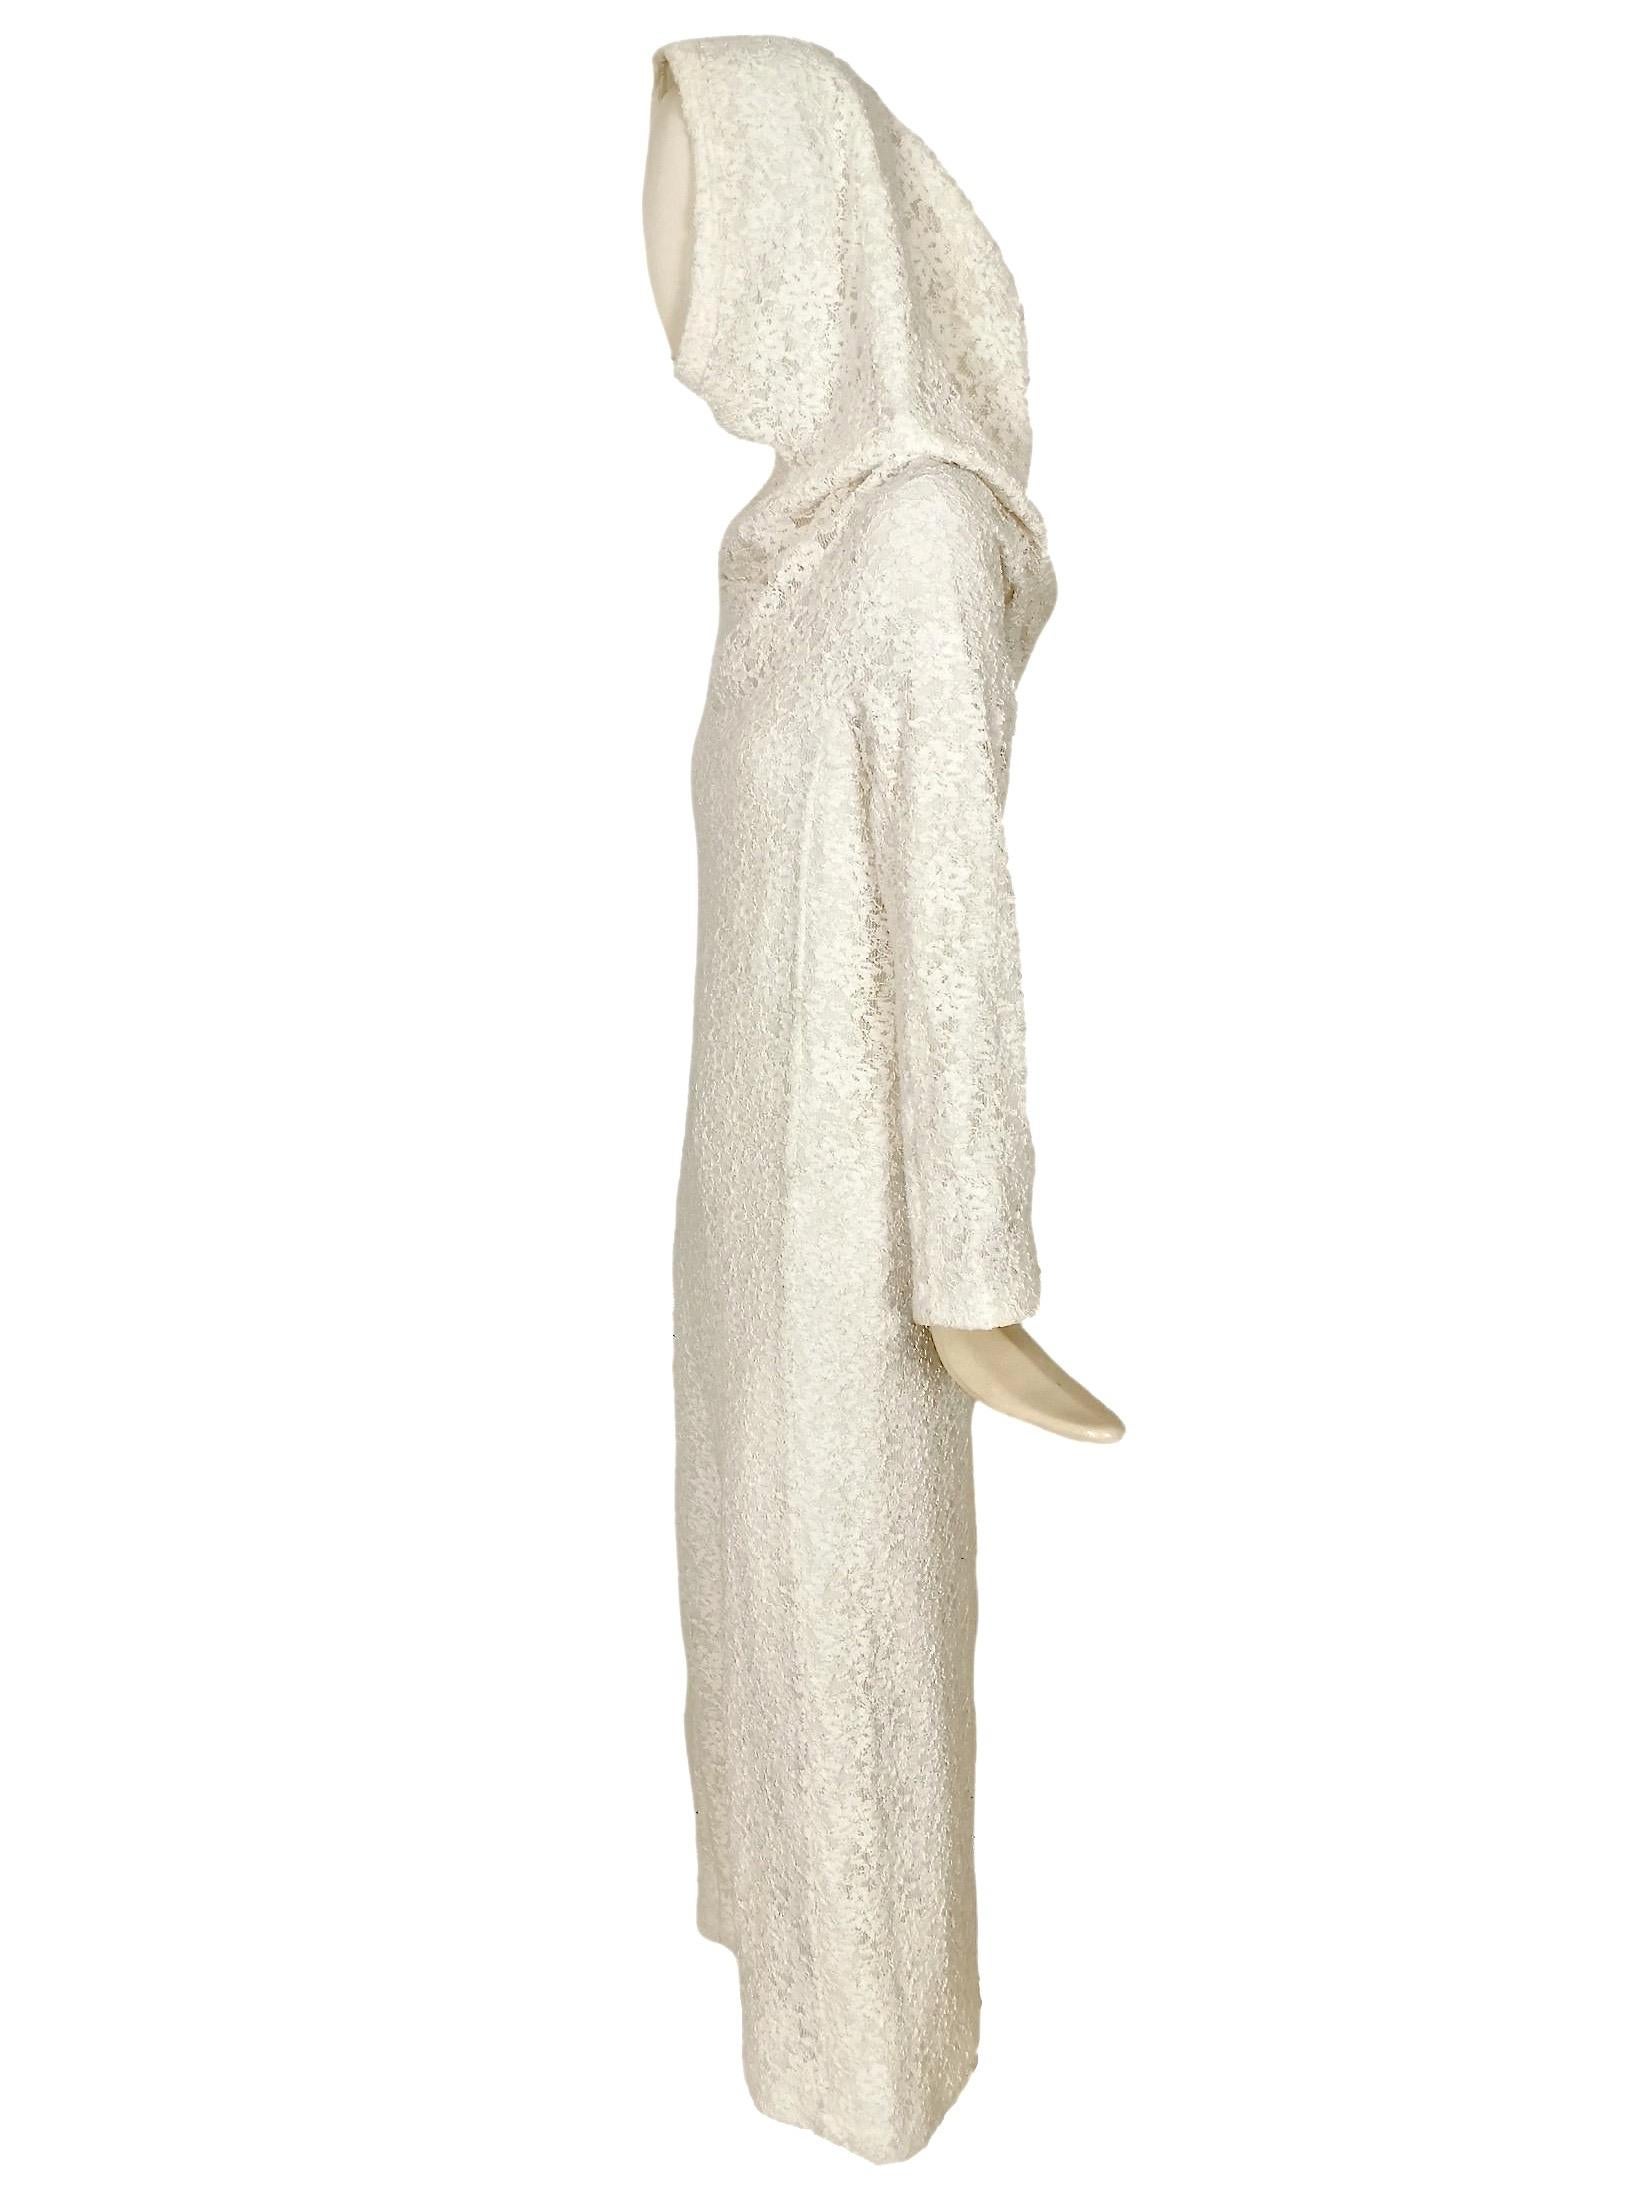 Comme Des Garcons White Drama Cowl Hooded Dress AD 2011 For Sale 3